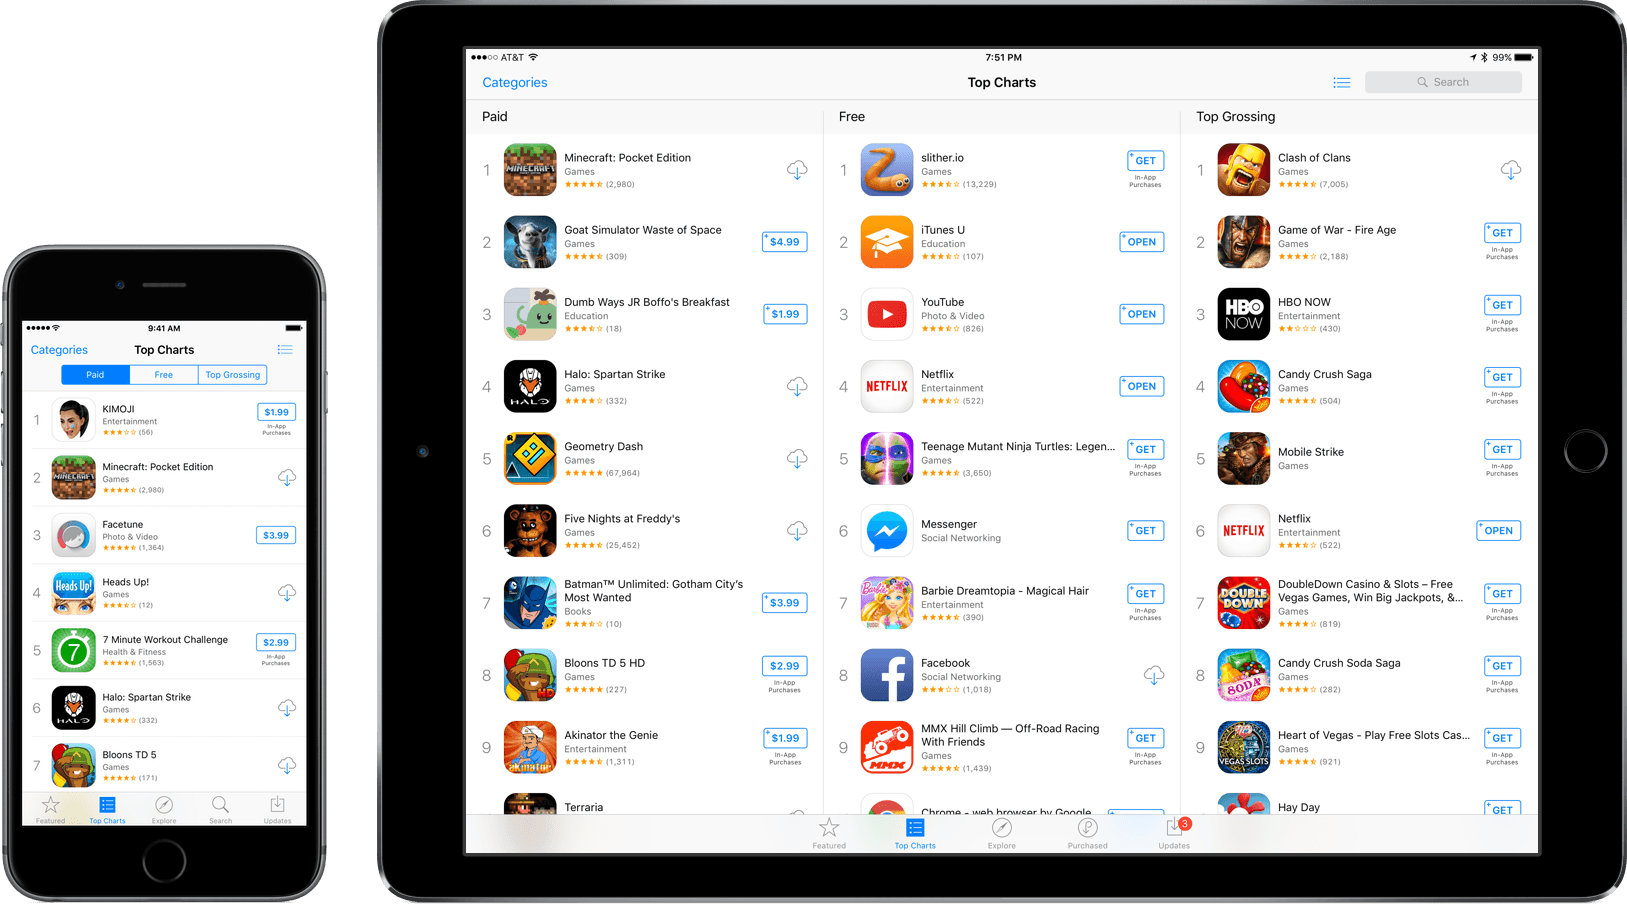 There is very little turnover in the App Store's top charts.